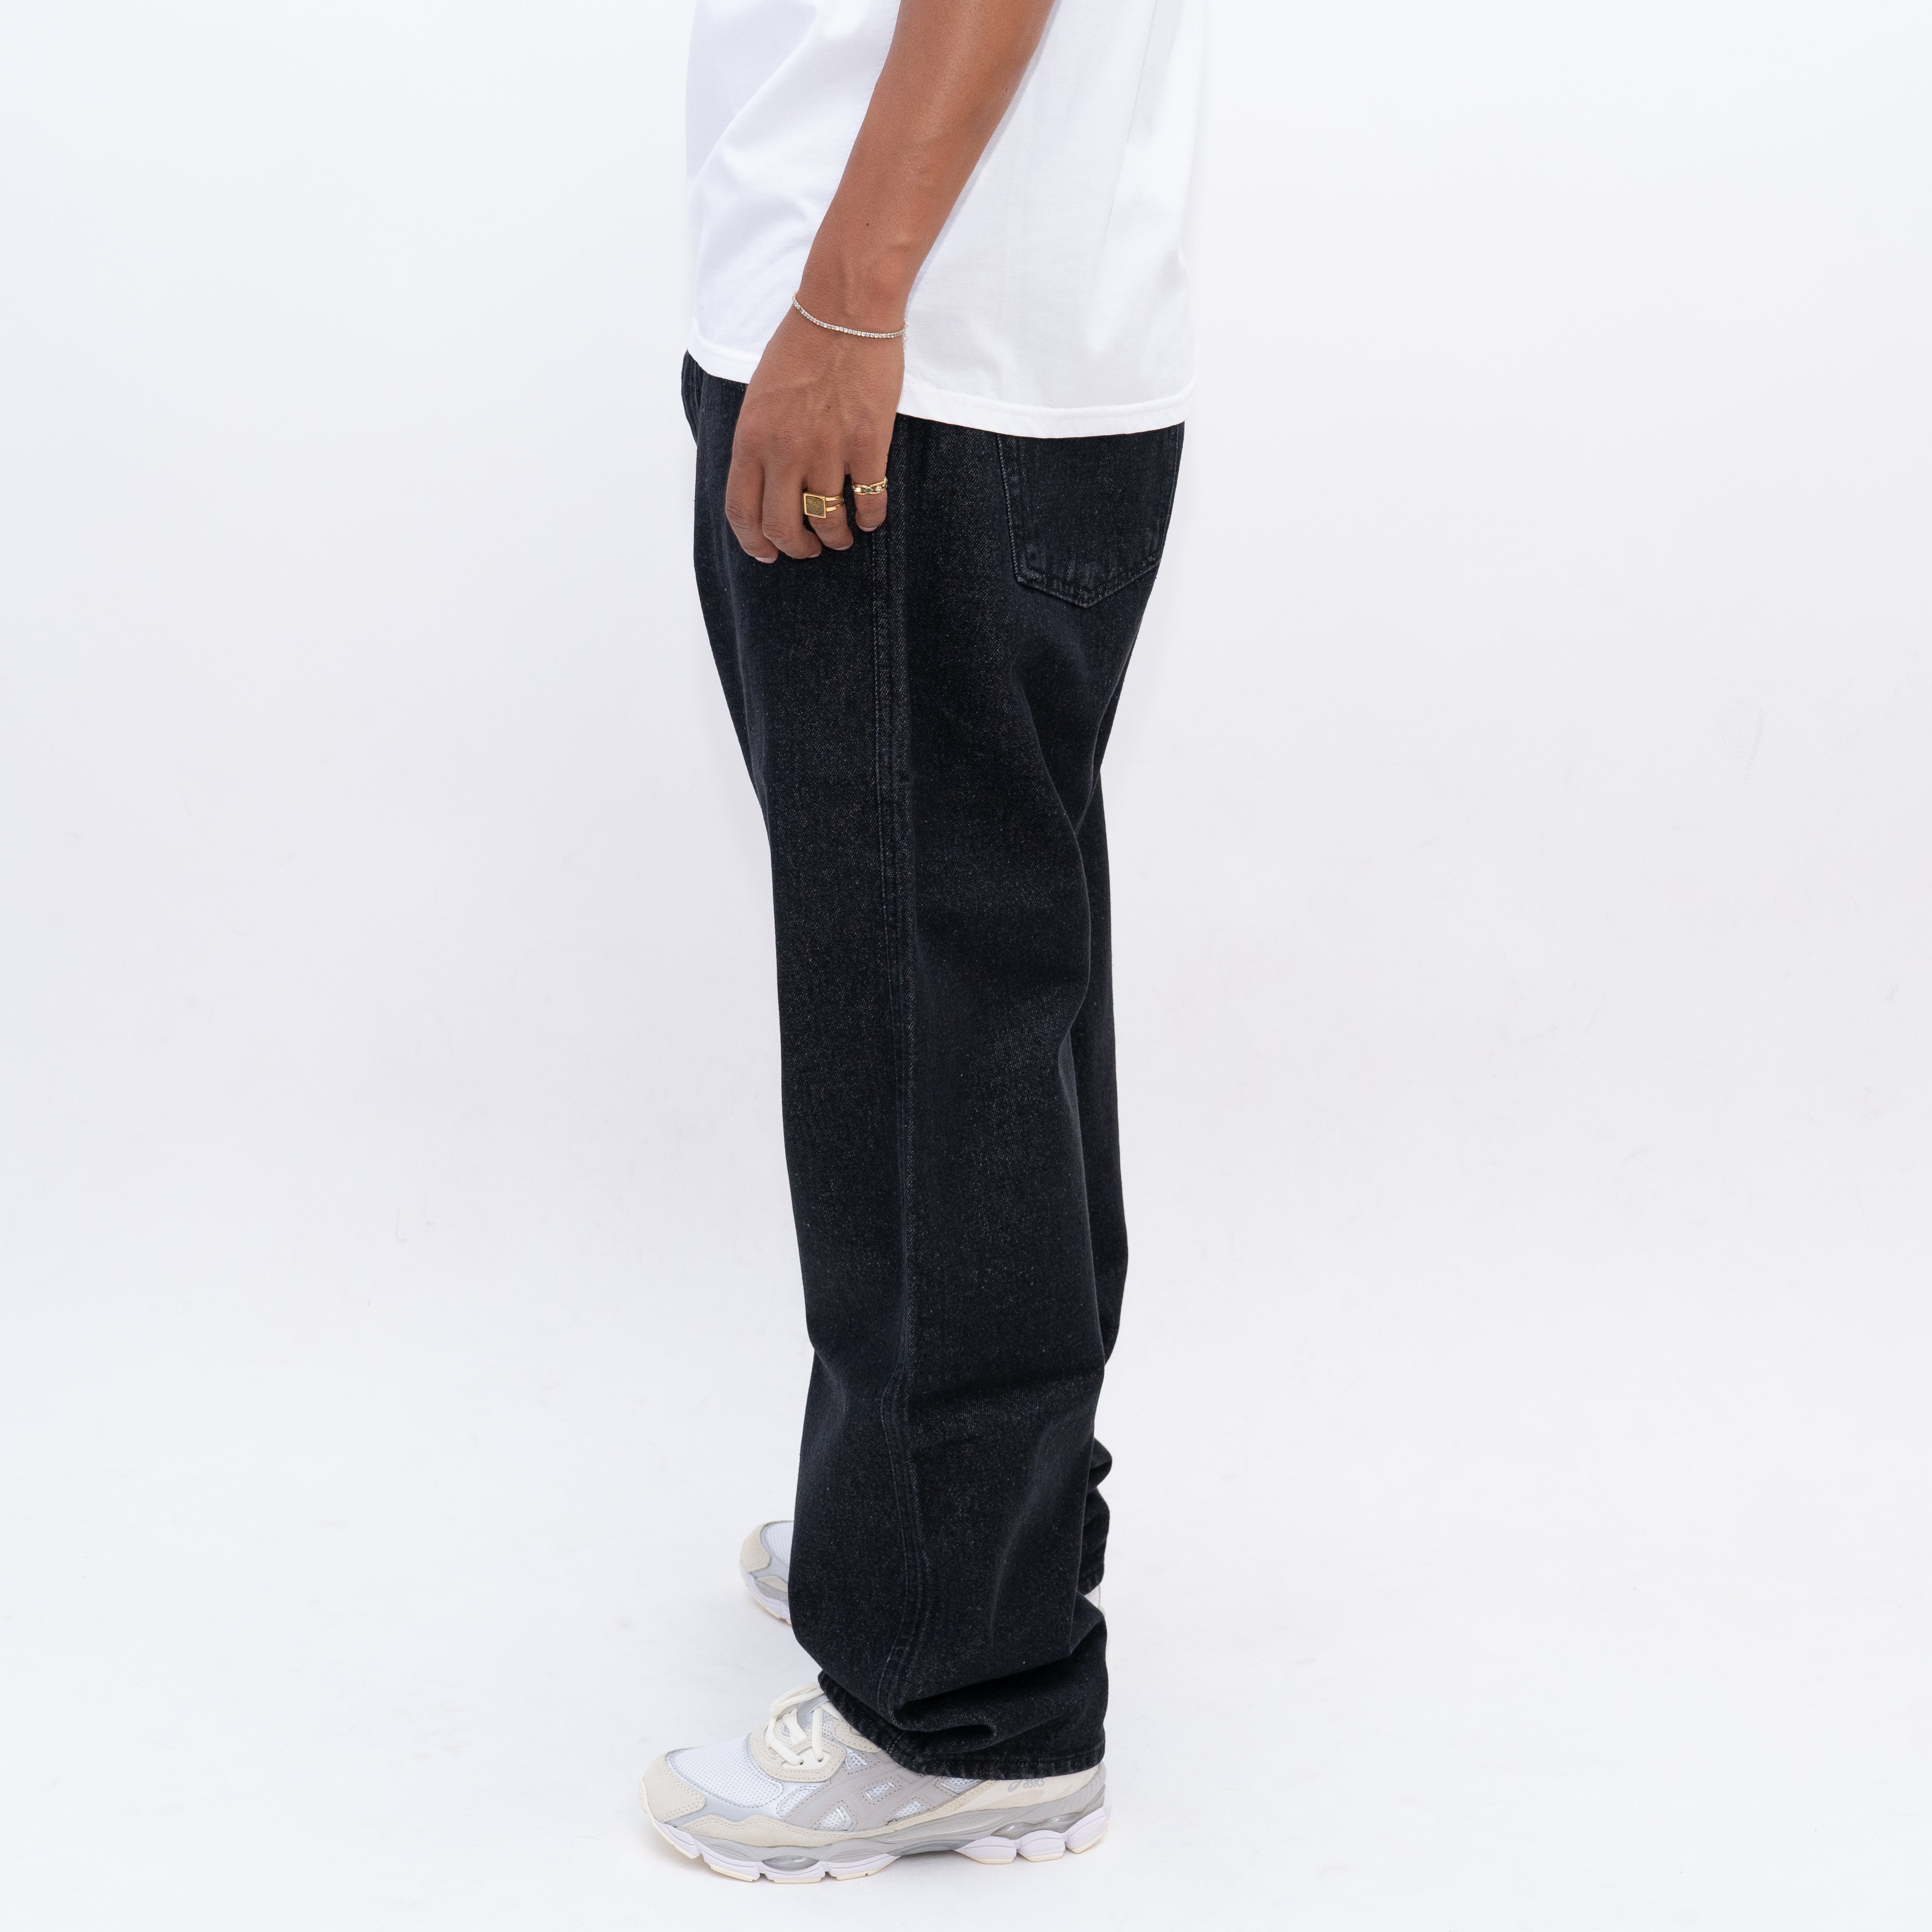 Baby Jeans Relaxed Fit Pants Black Rinsed